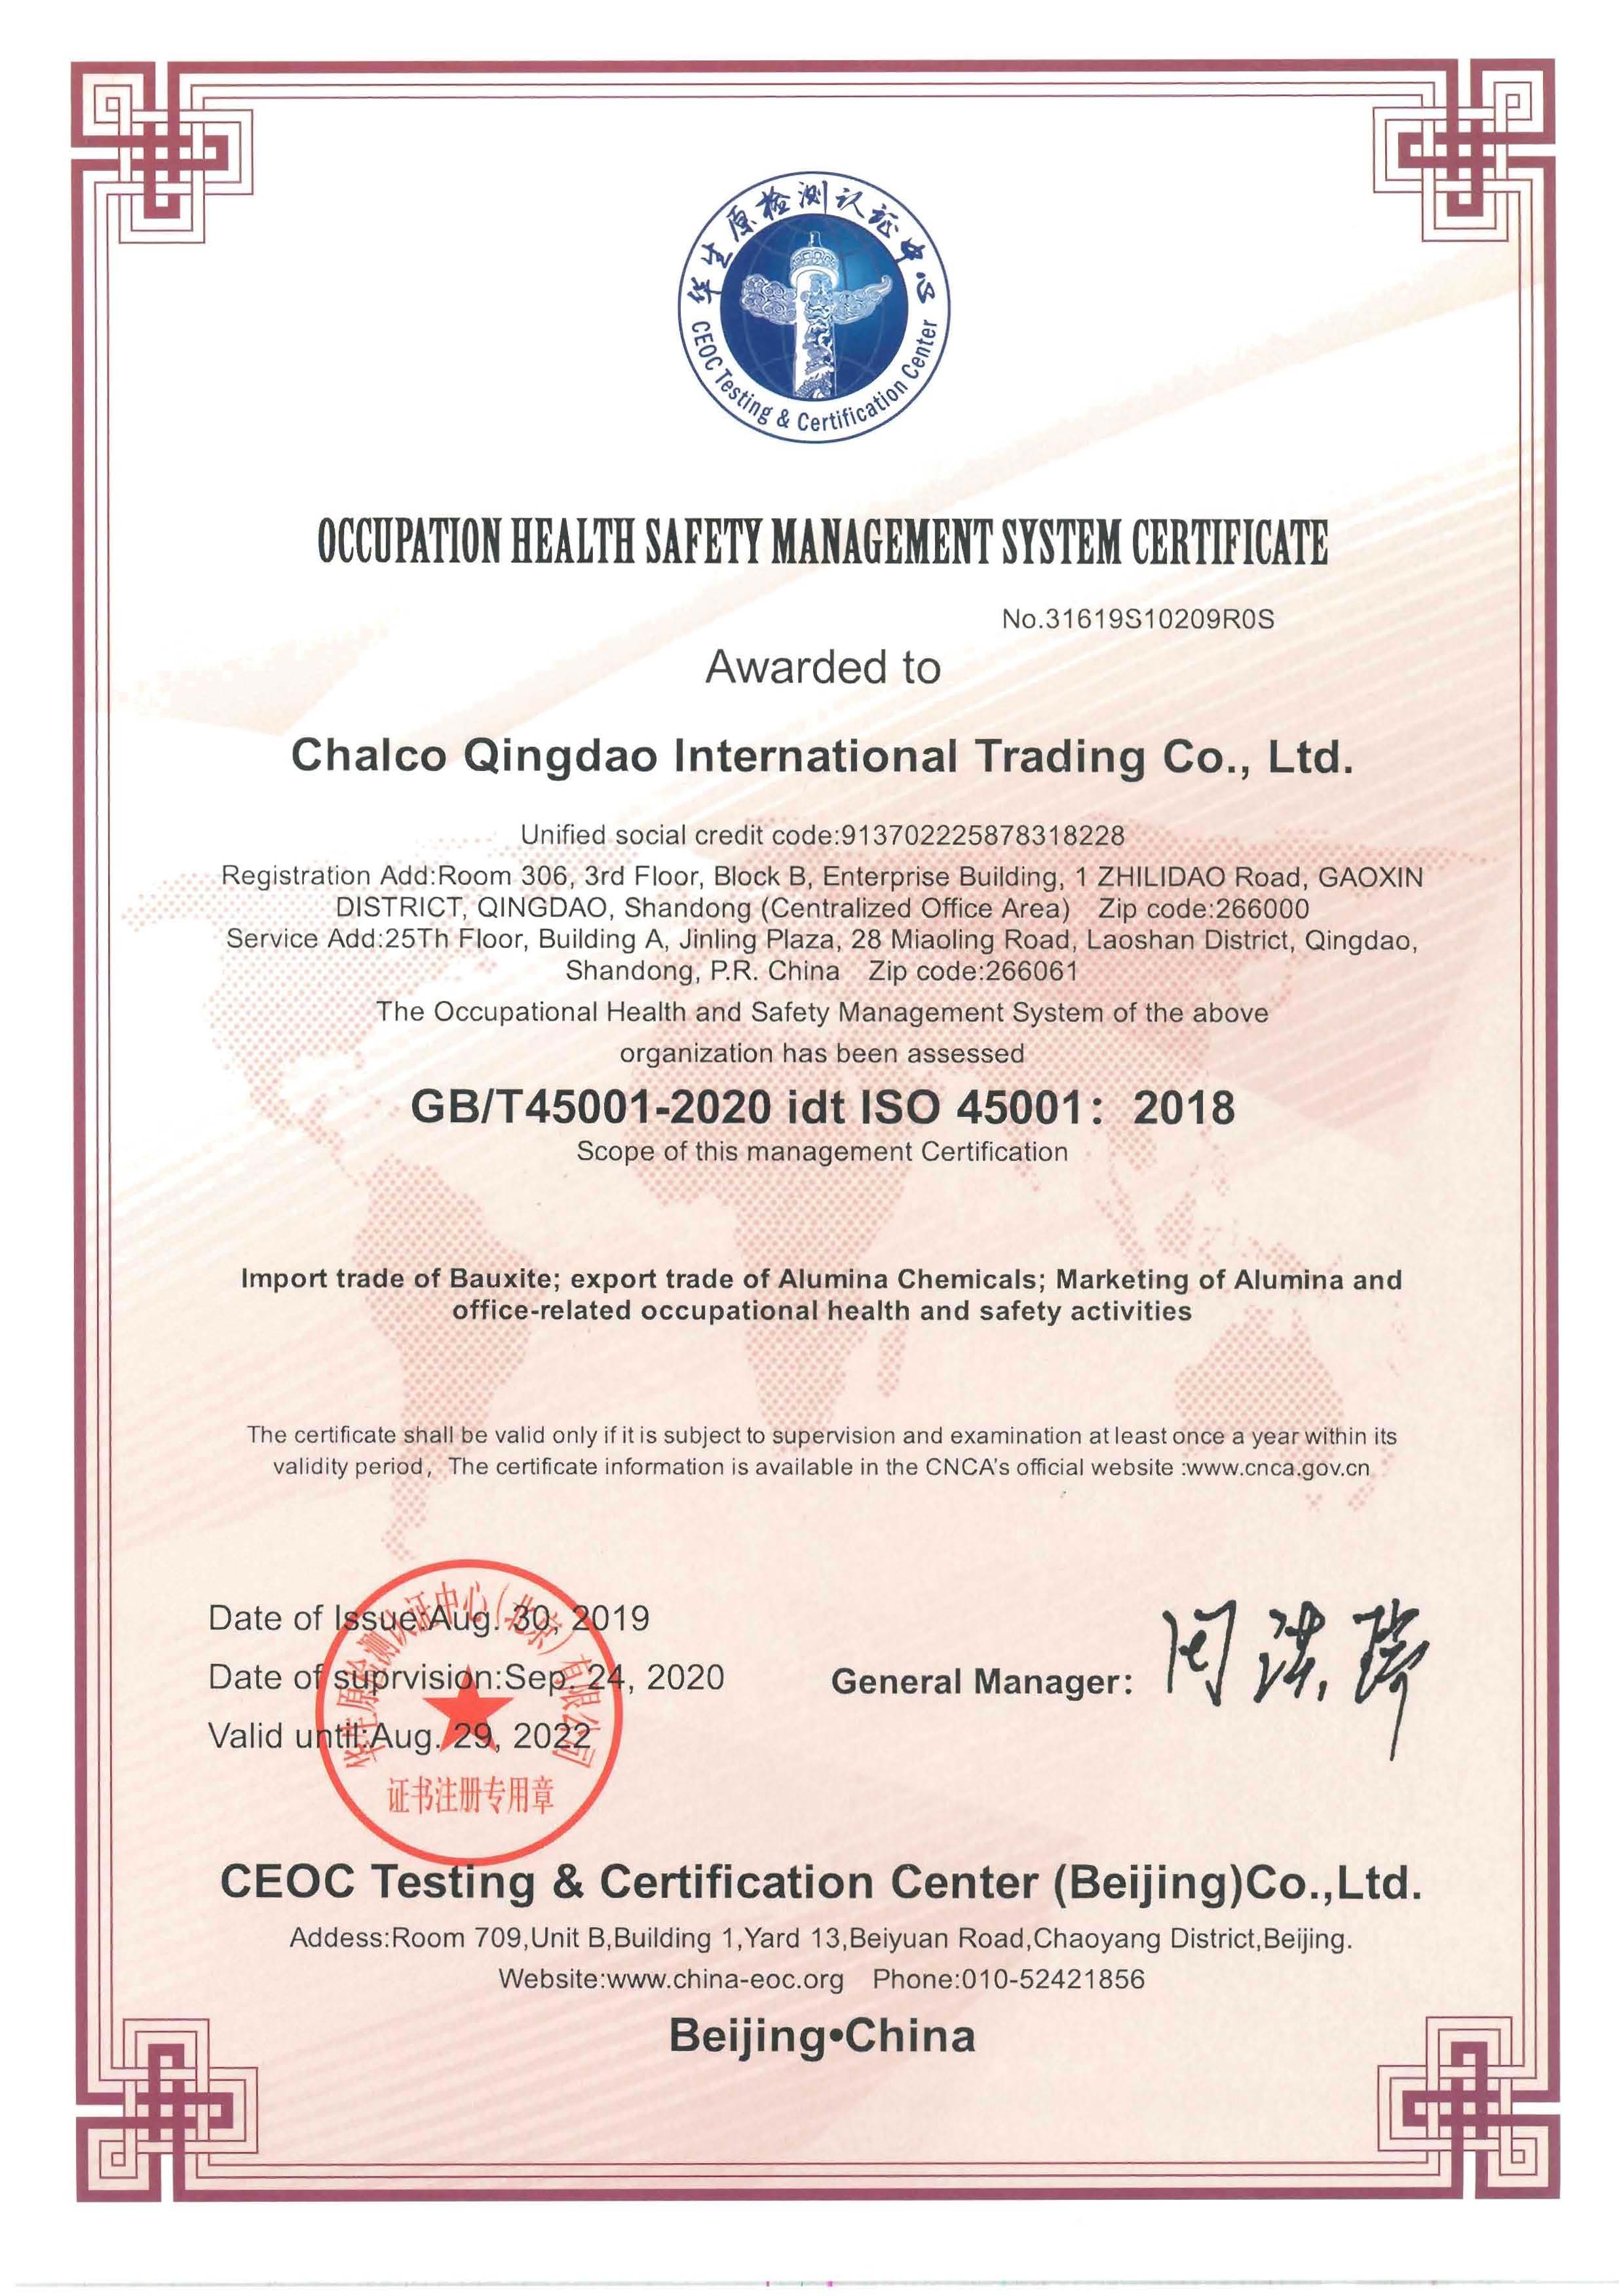 OCCUPATION HEALTH SAFETY MANAGEMENT SYSTEM CERTIFICATE